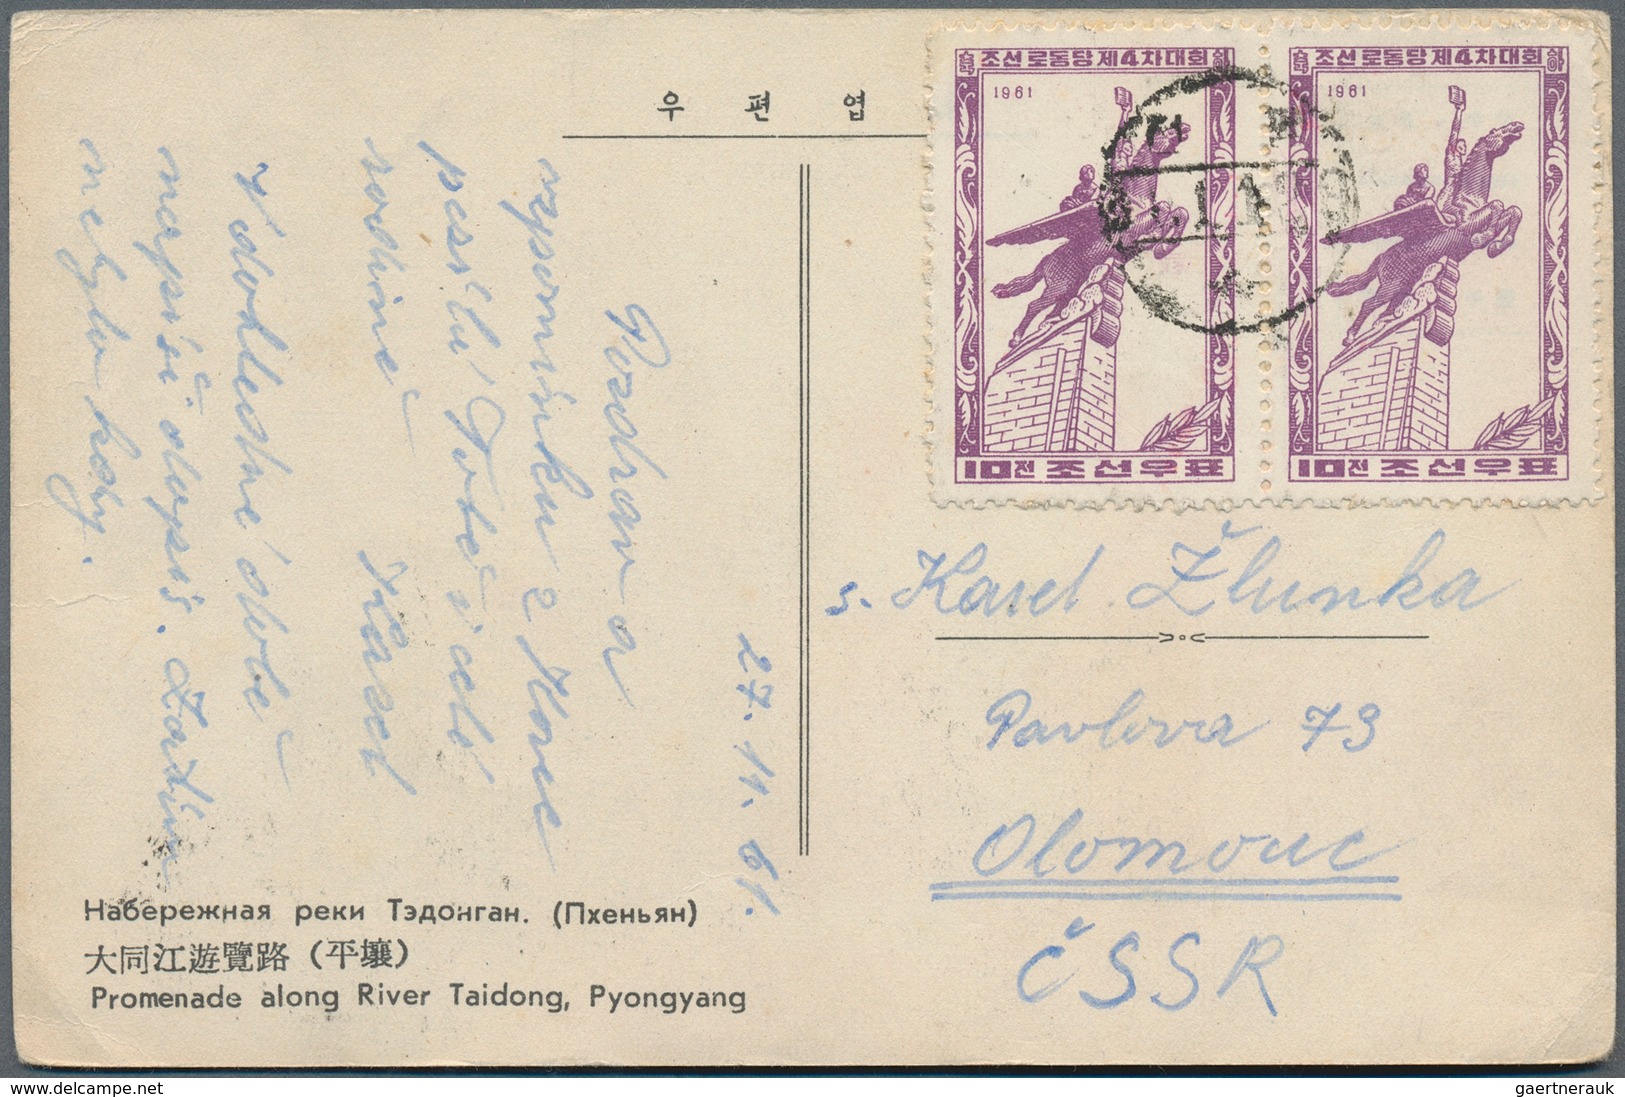 Korea-Nord: 1952/80, lot covers /7), used ppc (10) resp. used stationery envelopes (2). Mostly used